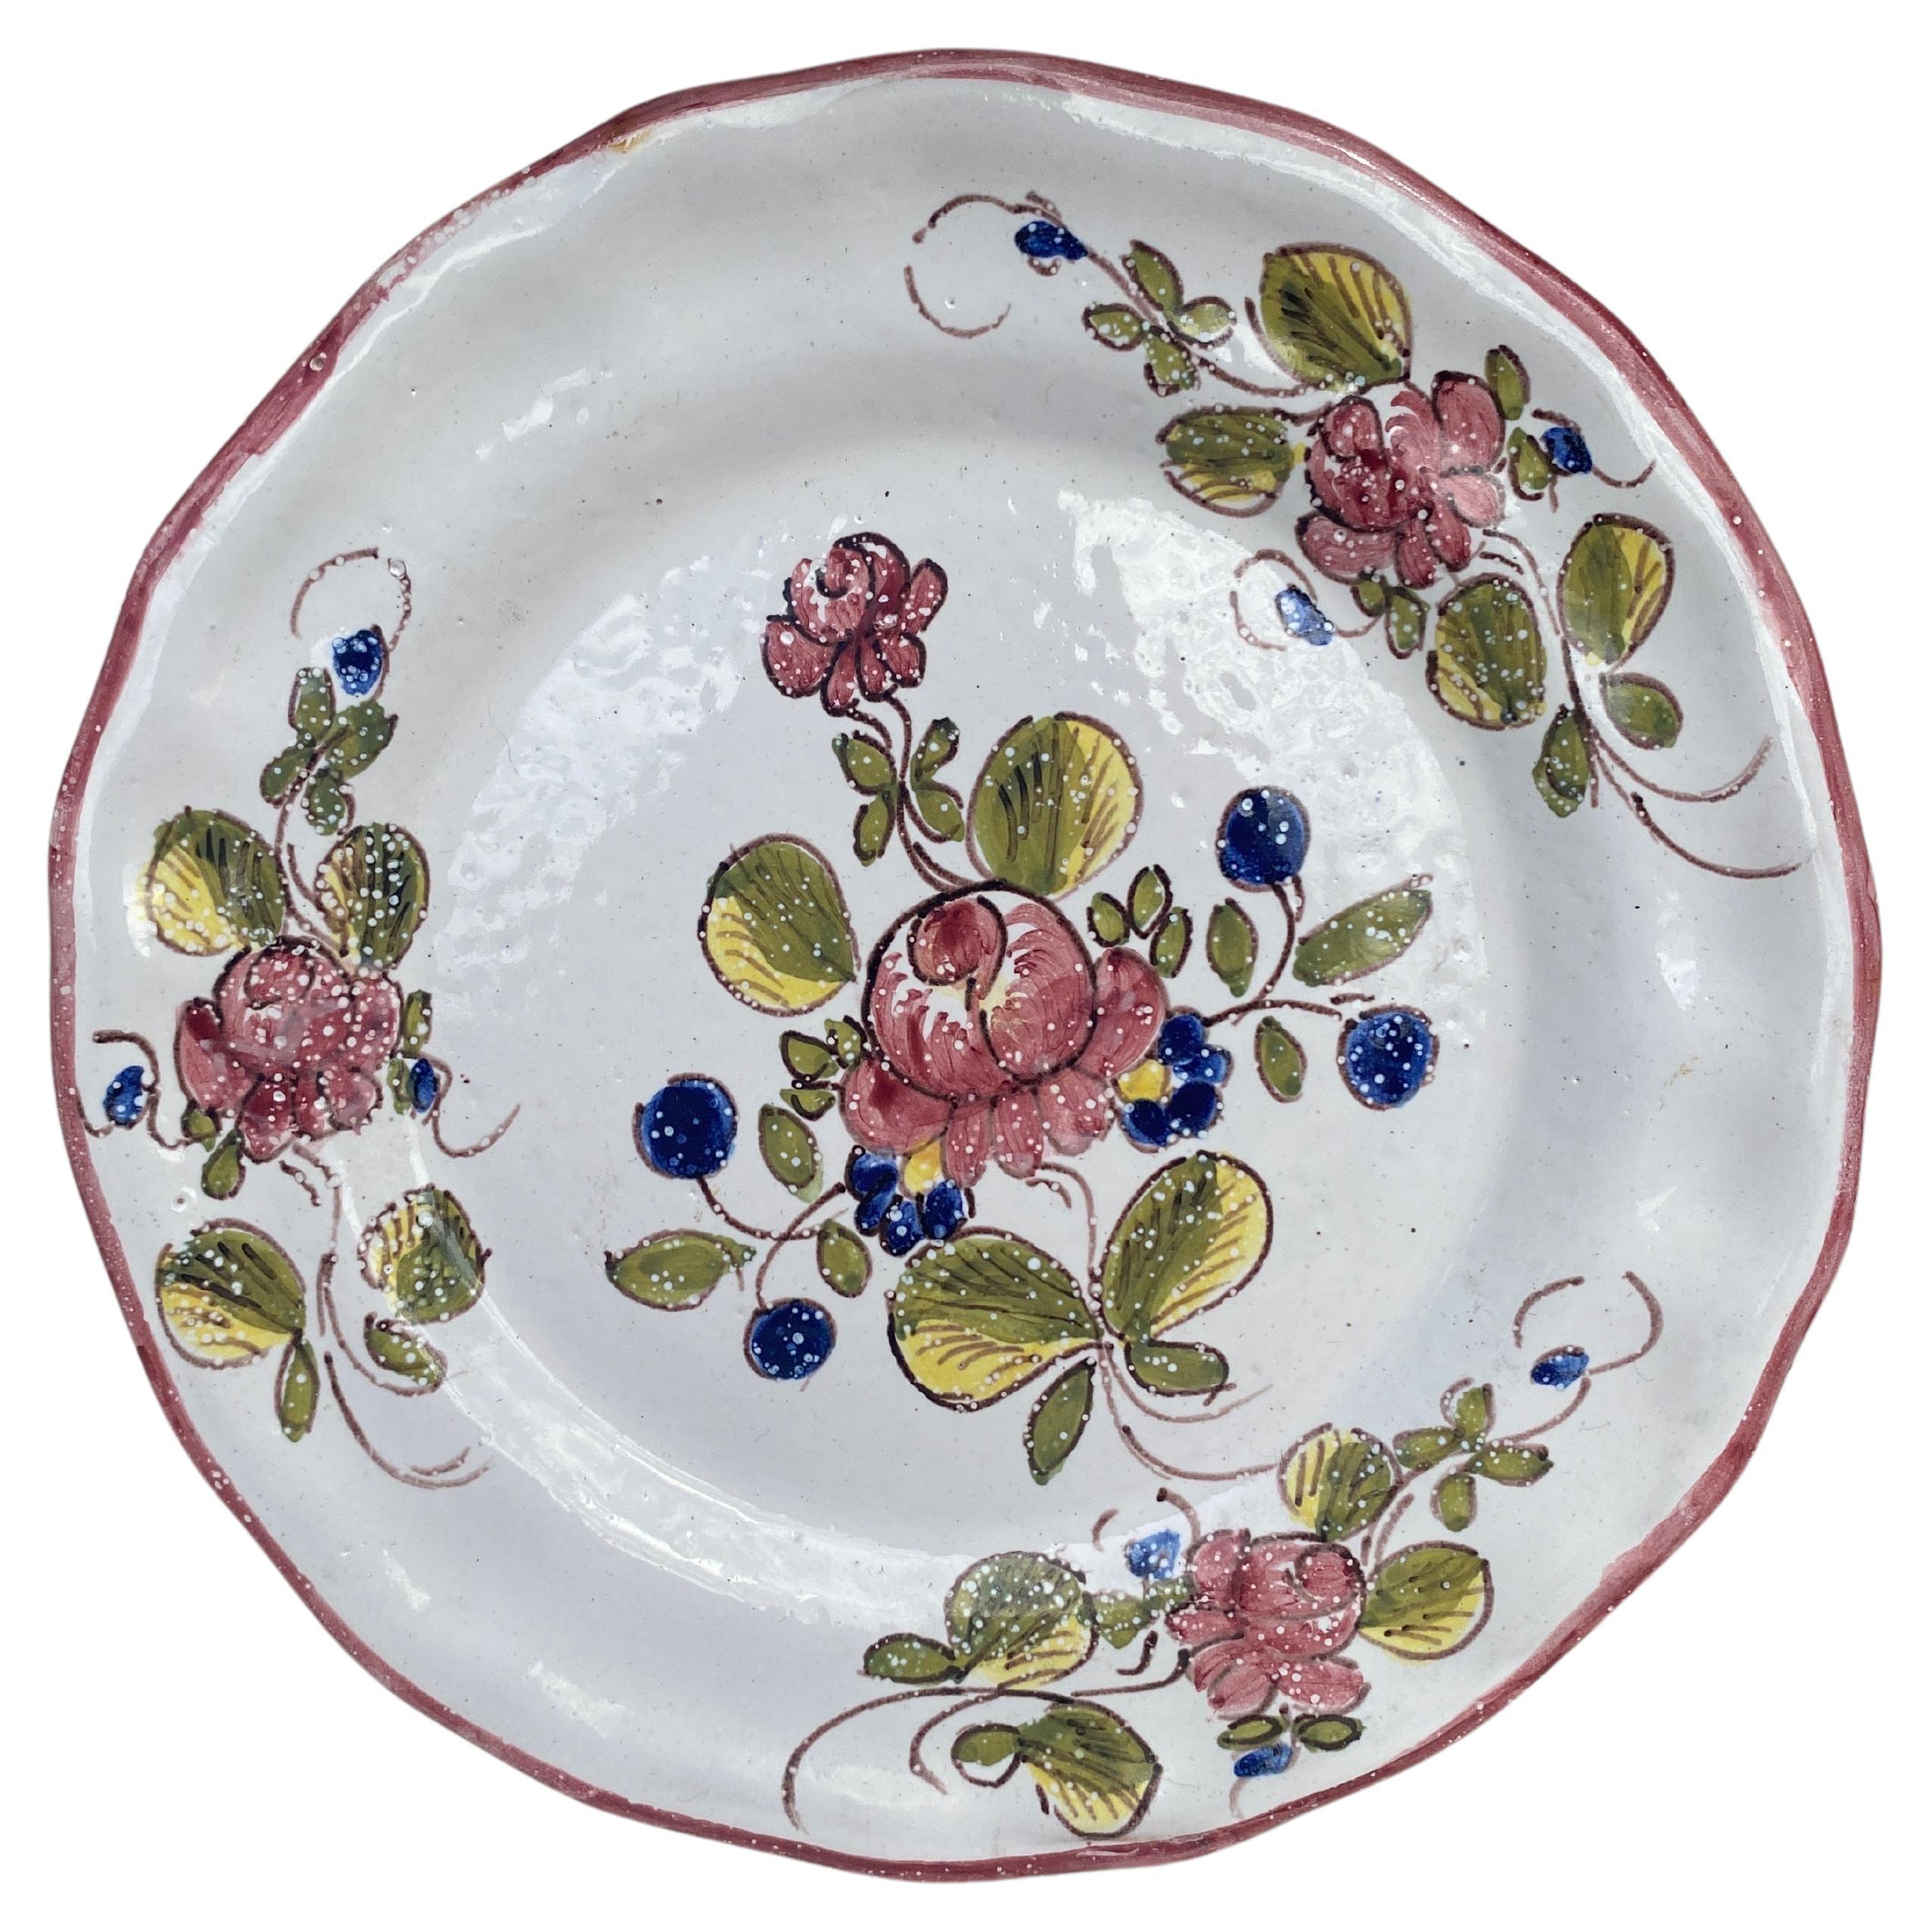 French Faience Flowers Plate Moustiers Style